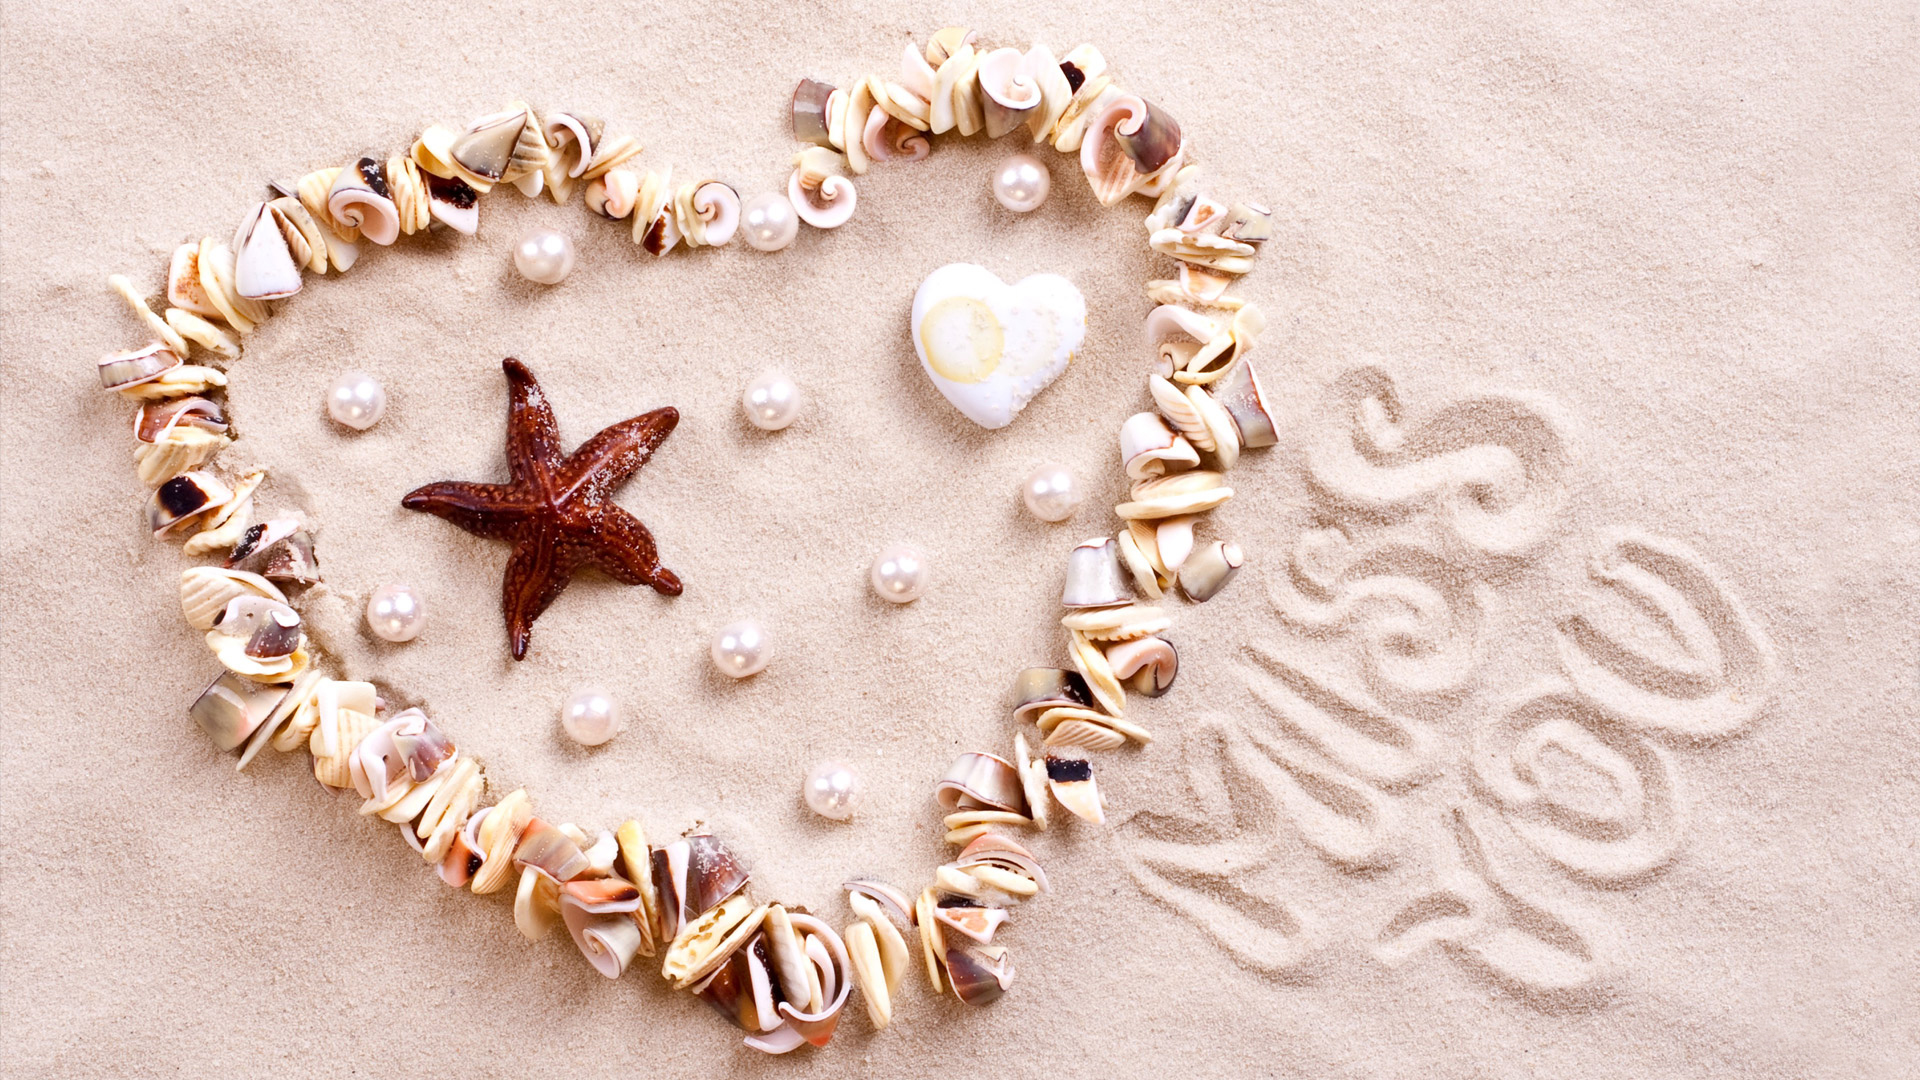 Download 1920x1080 Wallpaper Sand, Heart, Shells, Pebbles, Miss You, Full Hd,  Hdtv, Fhd, 1080p, 1920x1080 Hd Image, Background, 12986